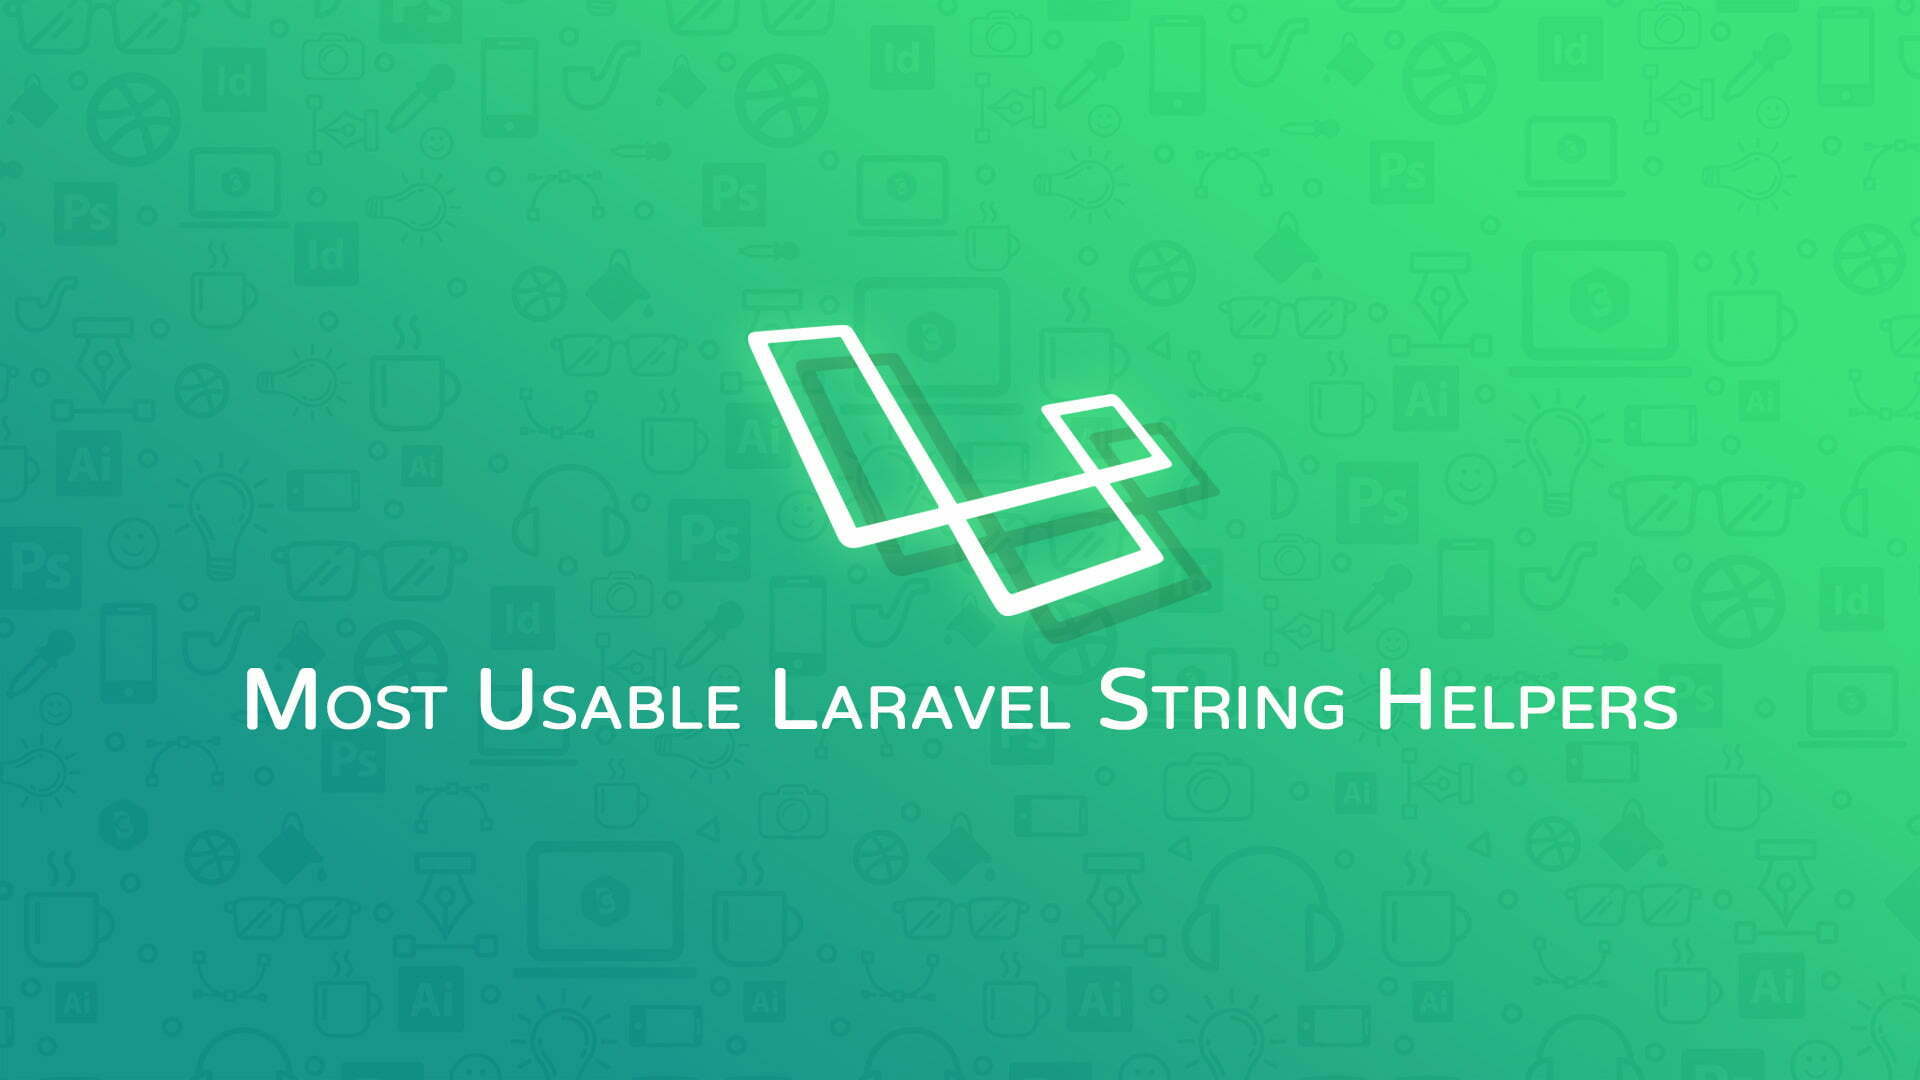 Most Usable Laravel String Helpers